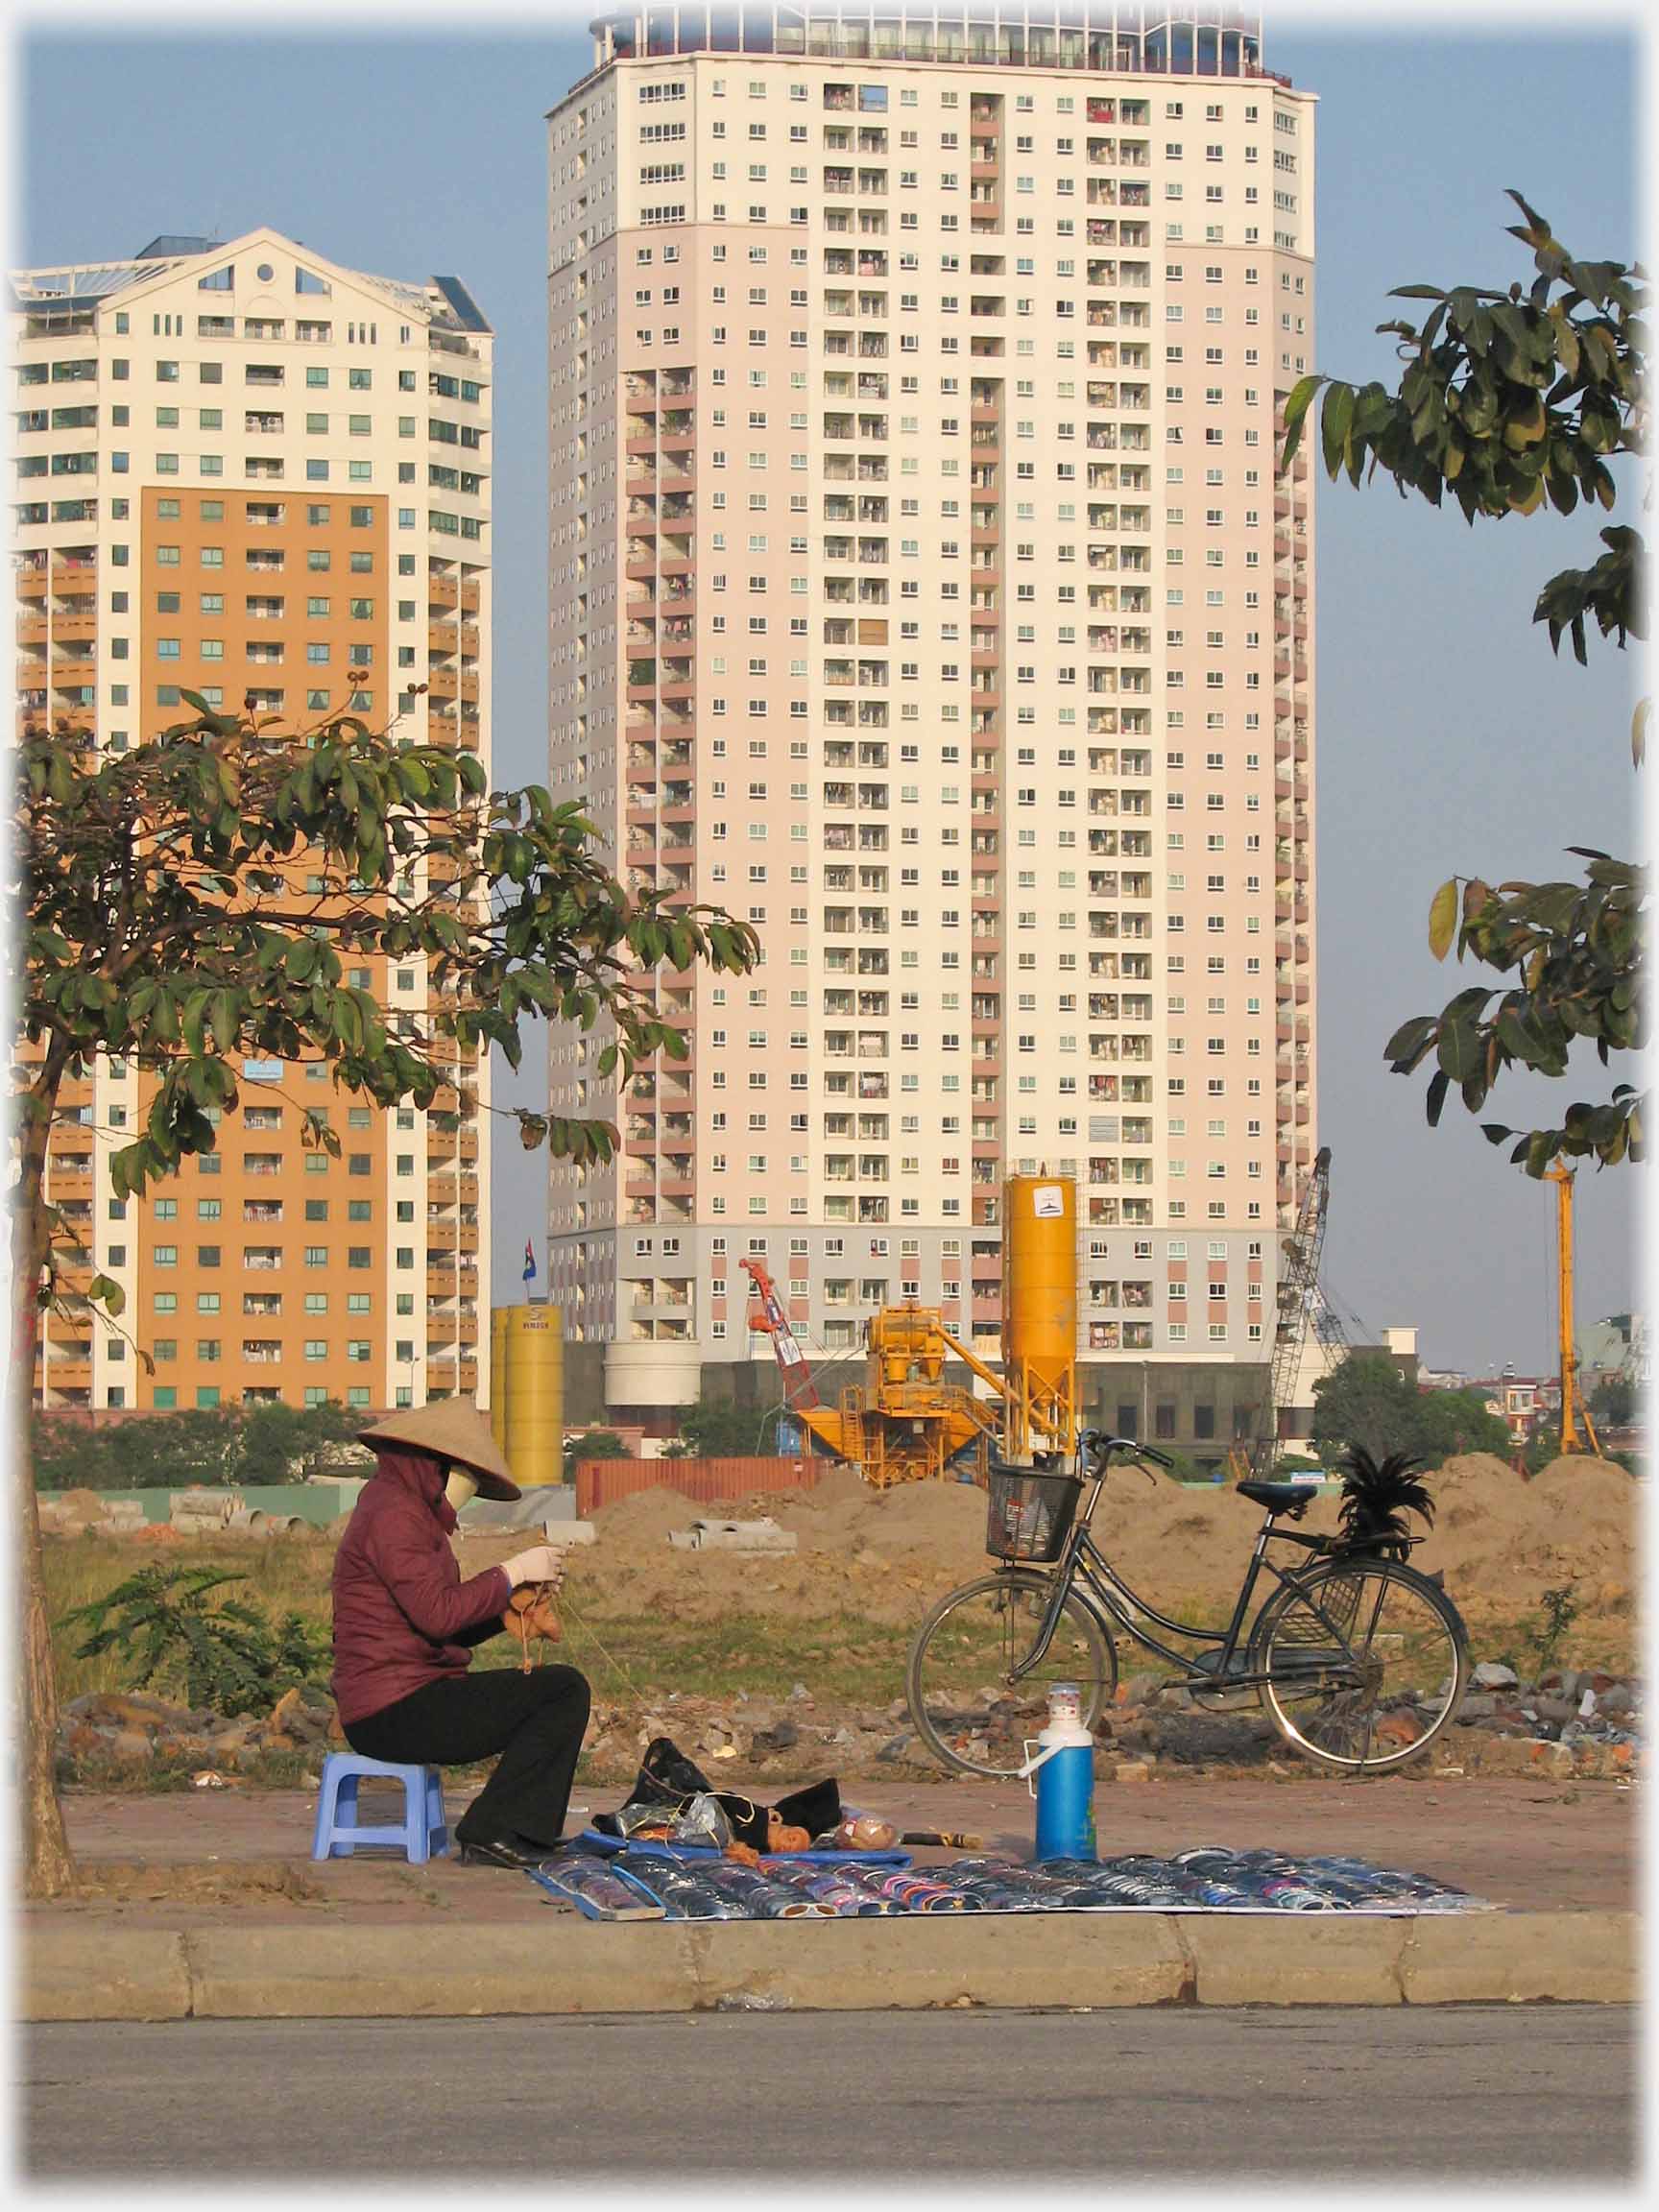 Two thirty story tower blocks form background to a woman sitting on the pavement knitting with her large selection of sunglasses laid out and a bike nearby.